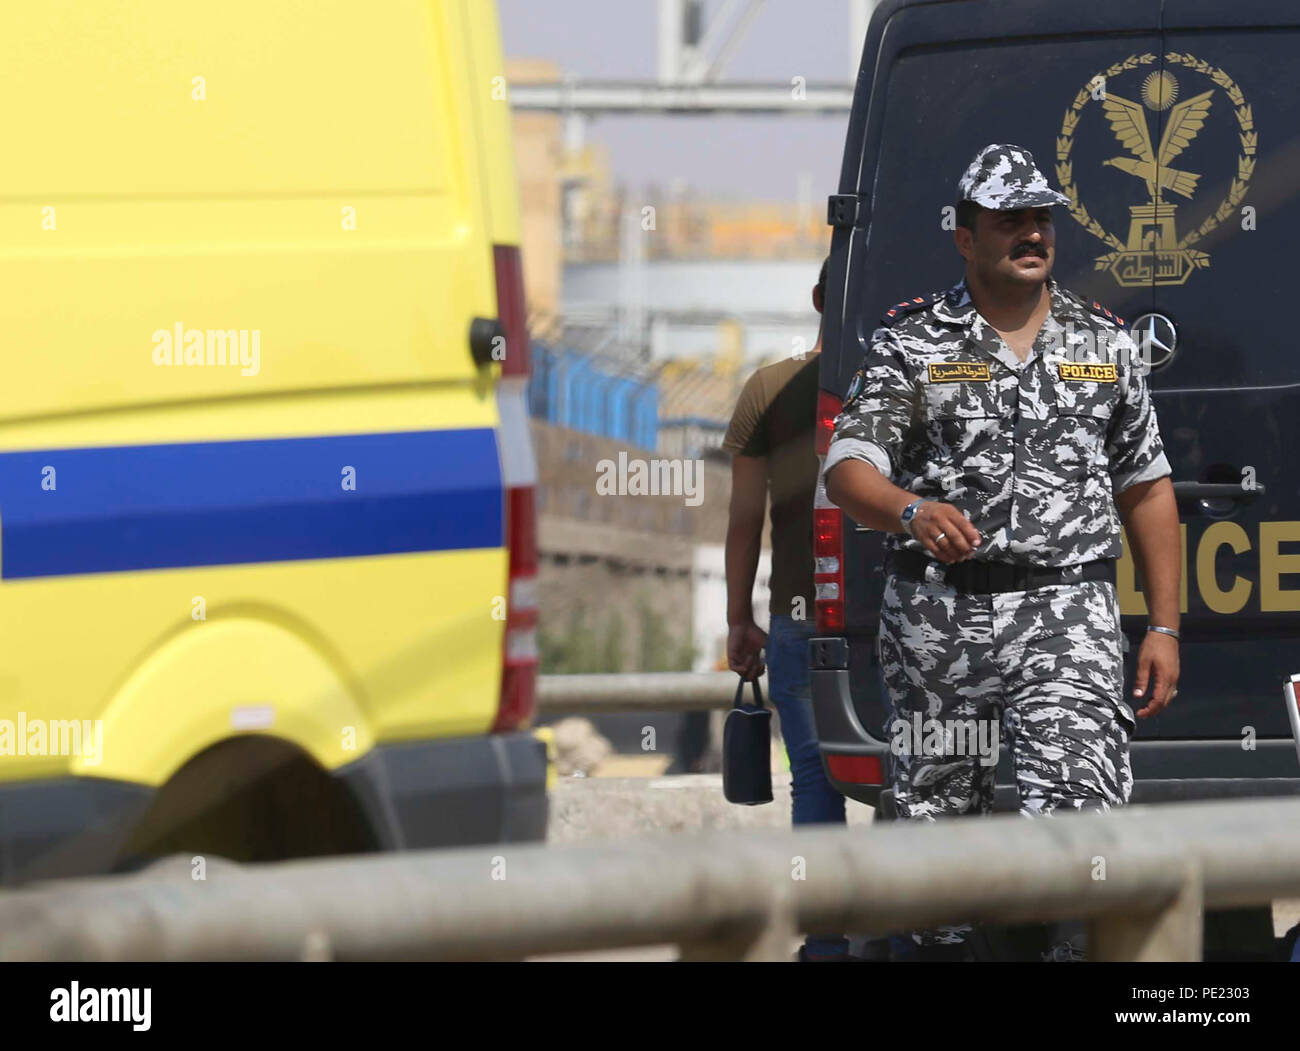 Cairo. 11th Aug, 2018. A police officer stands guard at the site where a suicide bomber detonated his explosive belt in Cairo, Egypt, Aug. 11, 2018. Egyptian forces have thwarted on Saturday an attempted attack on a church in Cairo before the suicide bomber infiltrating into the crowd, state-run Ahram news website reported. Credit: Xinhua/Alamy Live News Stock Photo